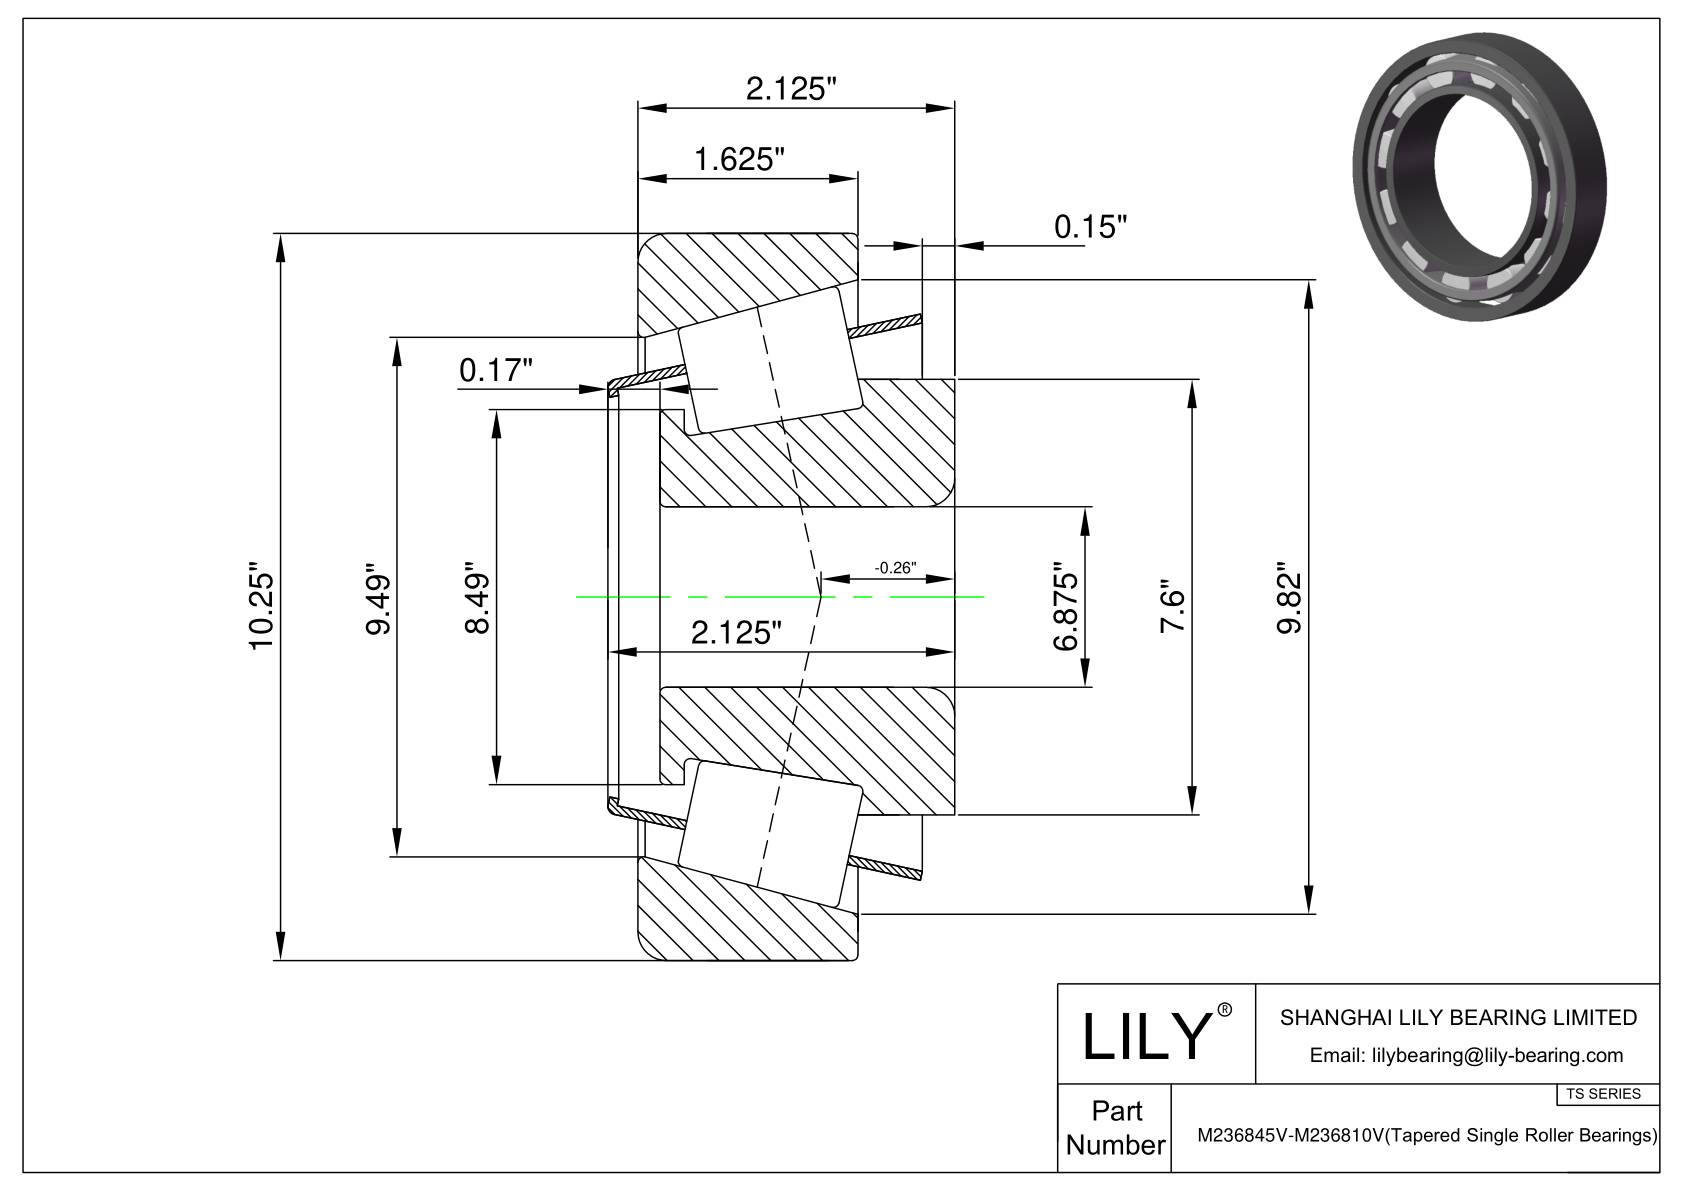 M236845V-M236810V TS (Tapered Single Roller Bearings) (Imperial) cad drawing